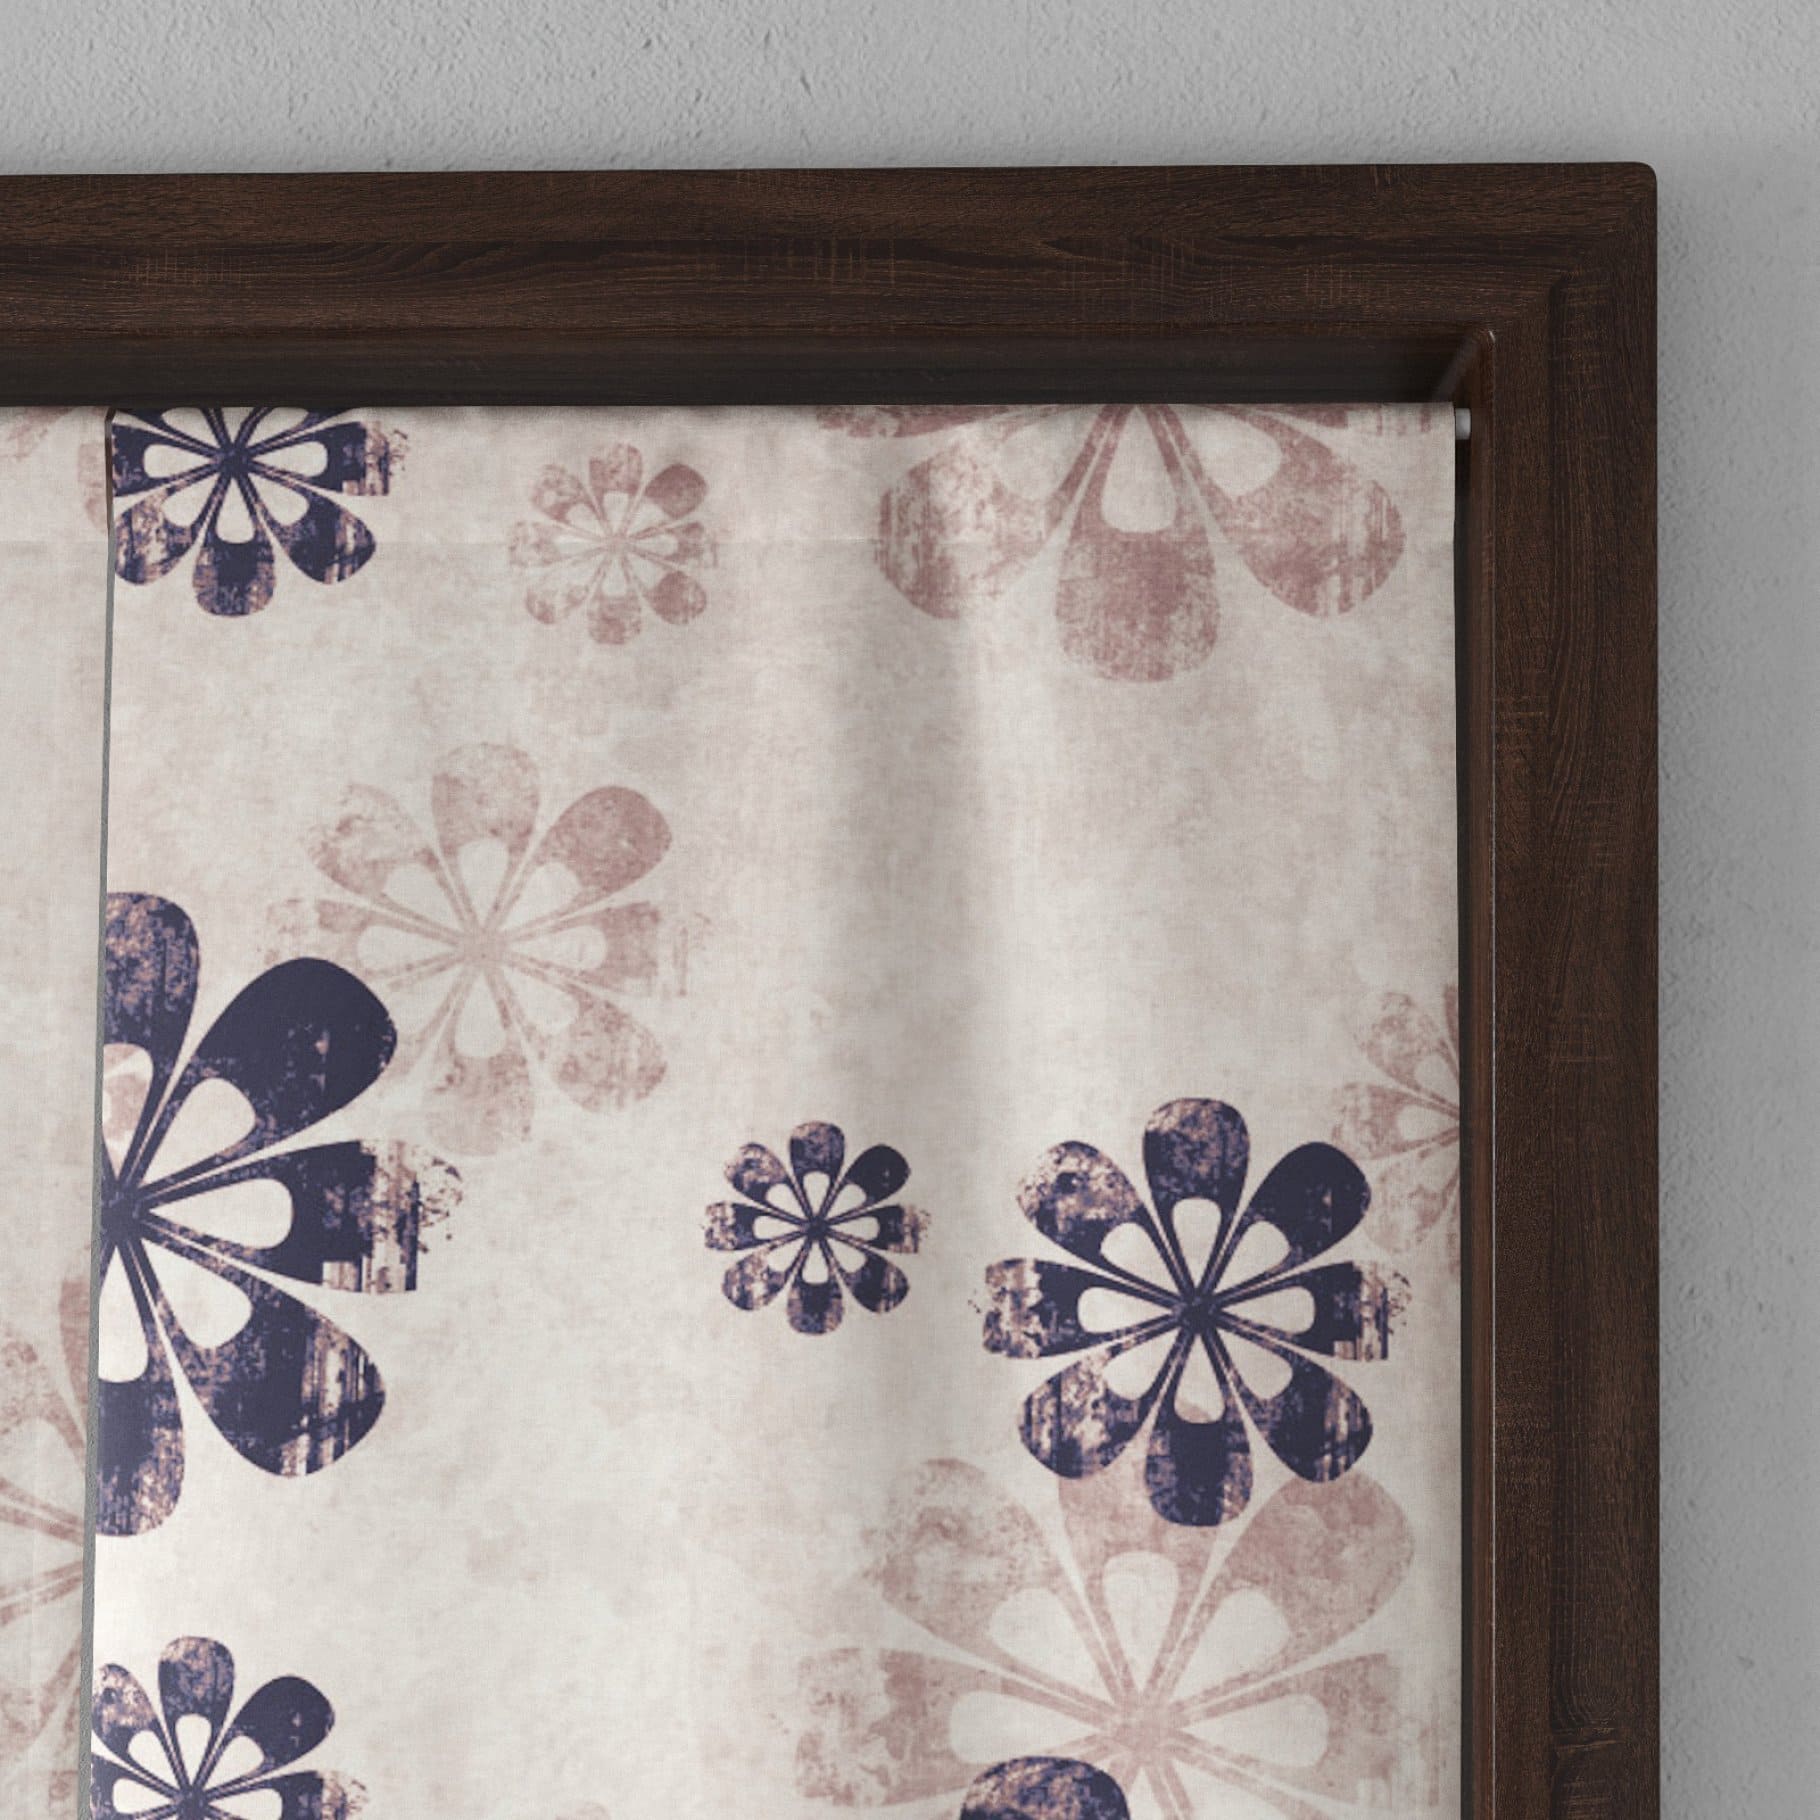 A corner of a Japanese curtain with flowers in the doorway.